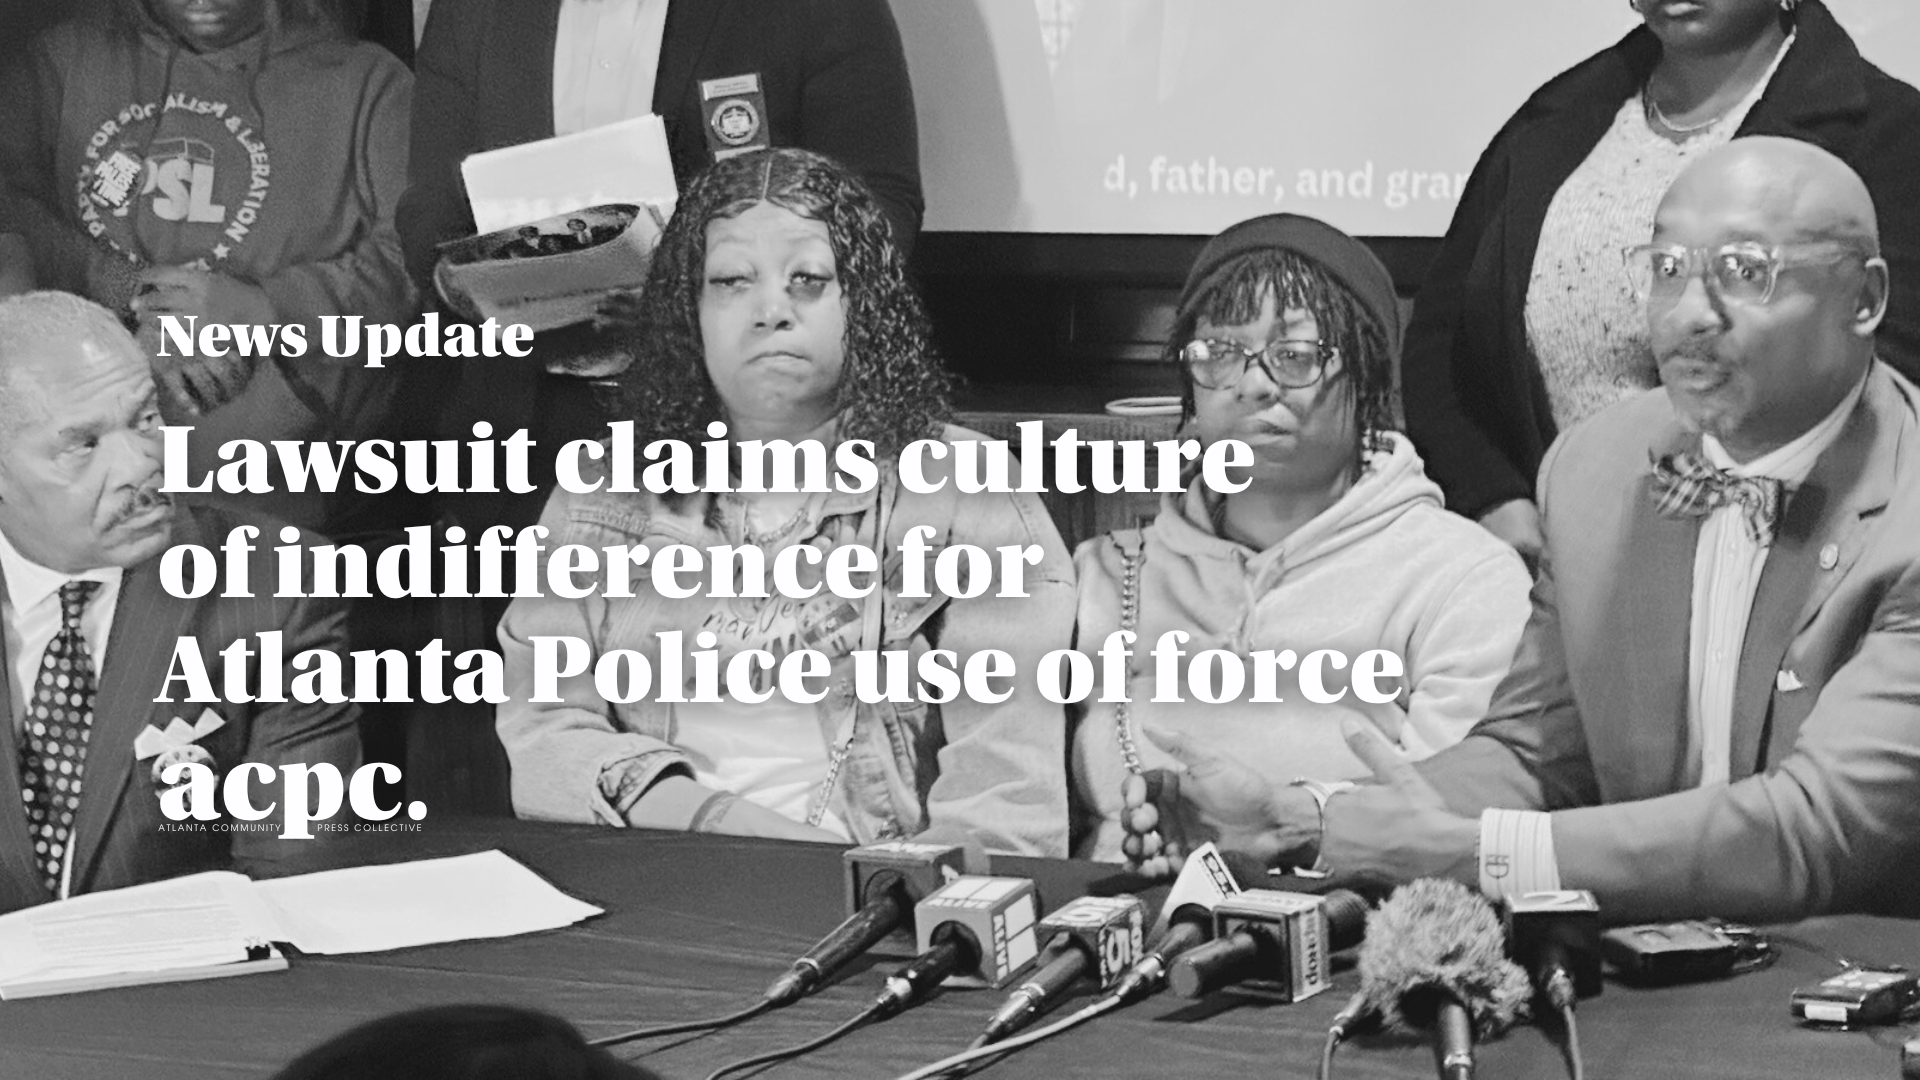 Lawsuit claims culture of indifference for Atlanta Police use of force